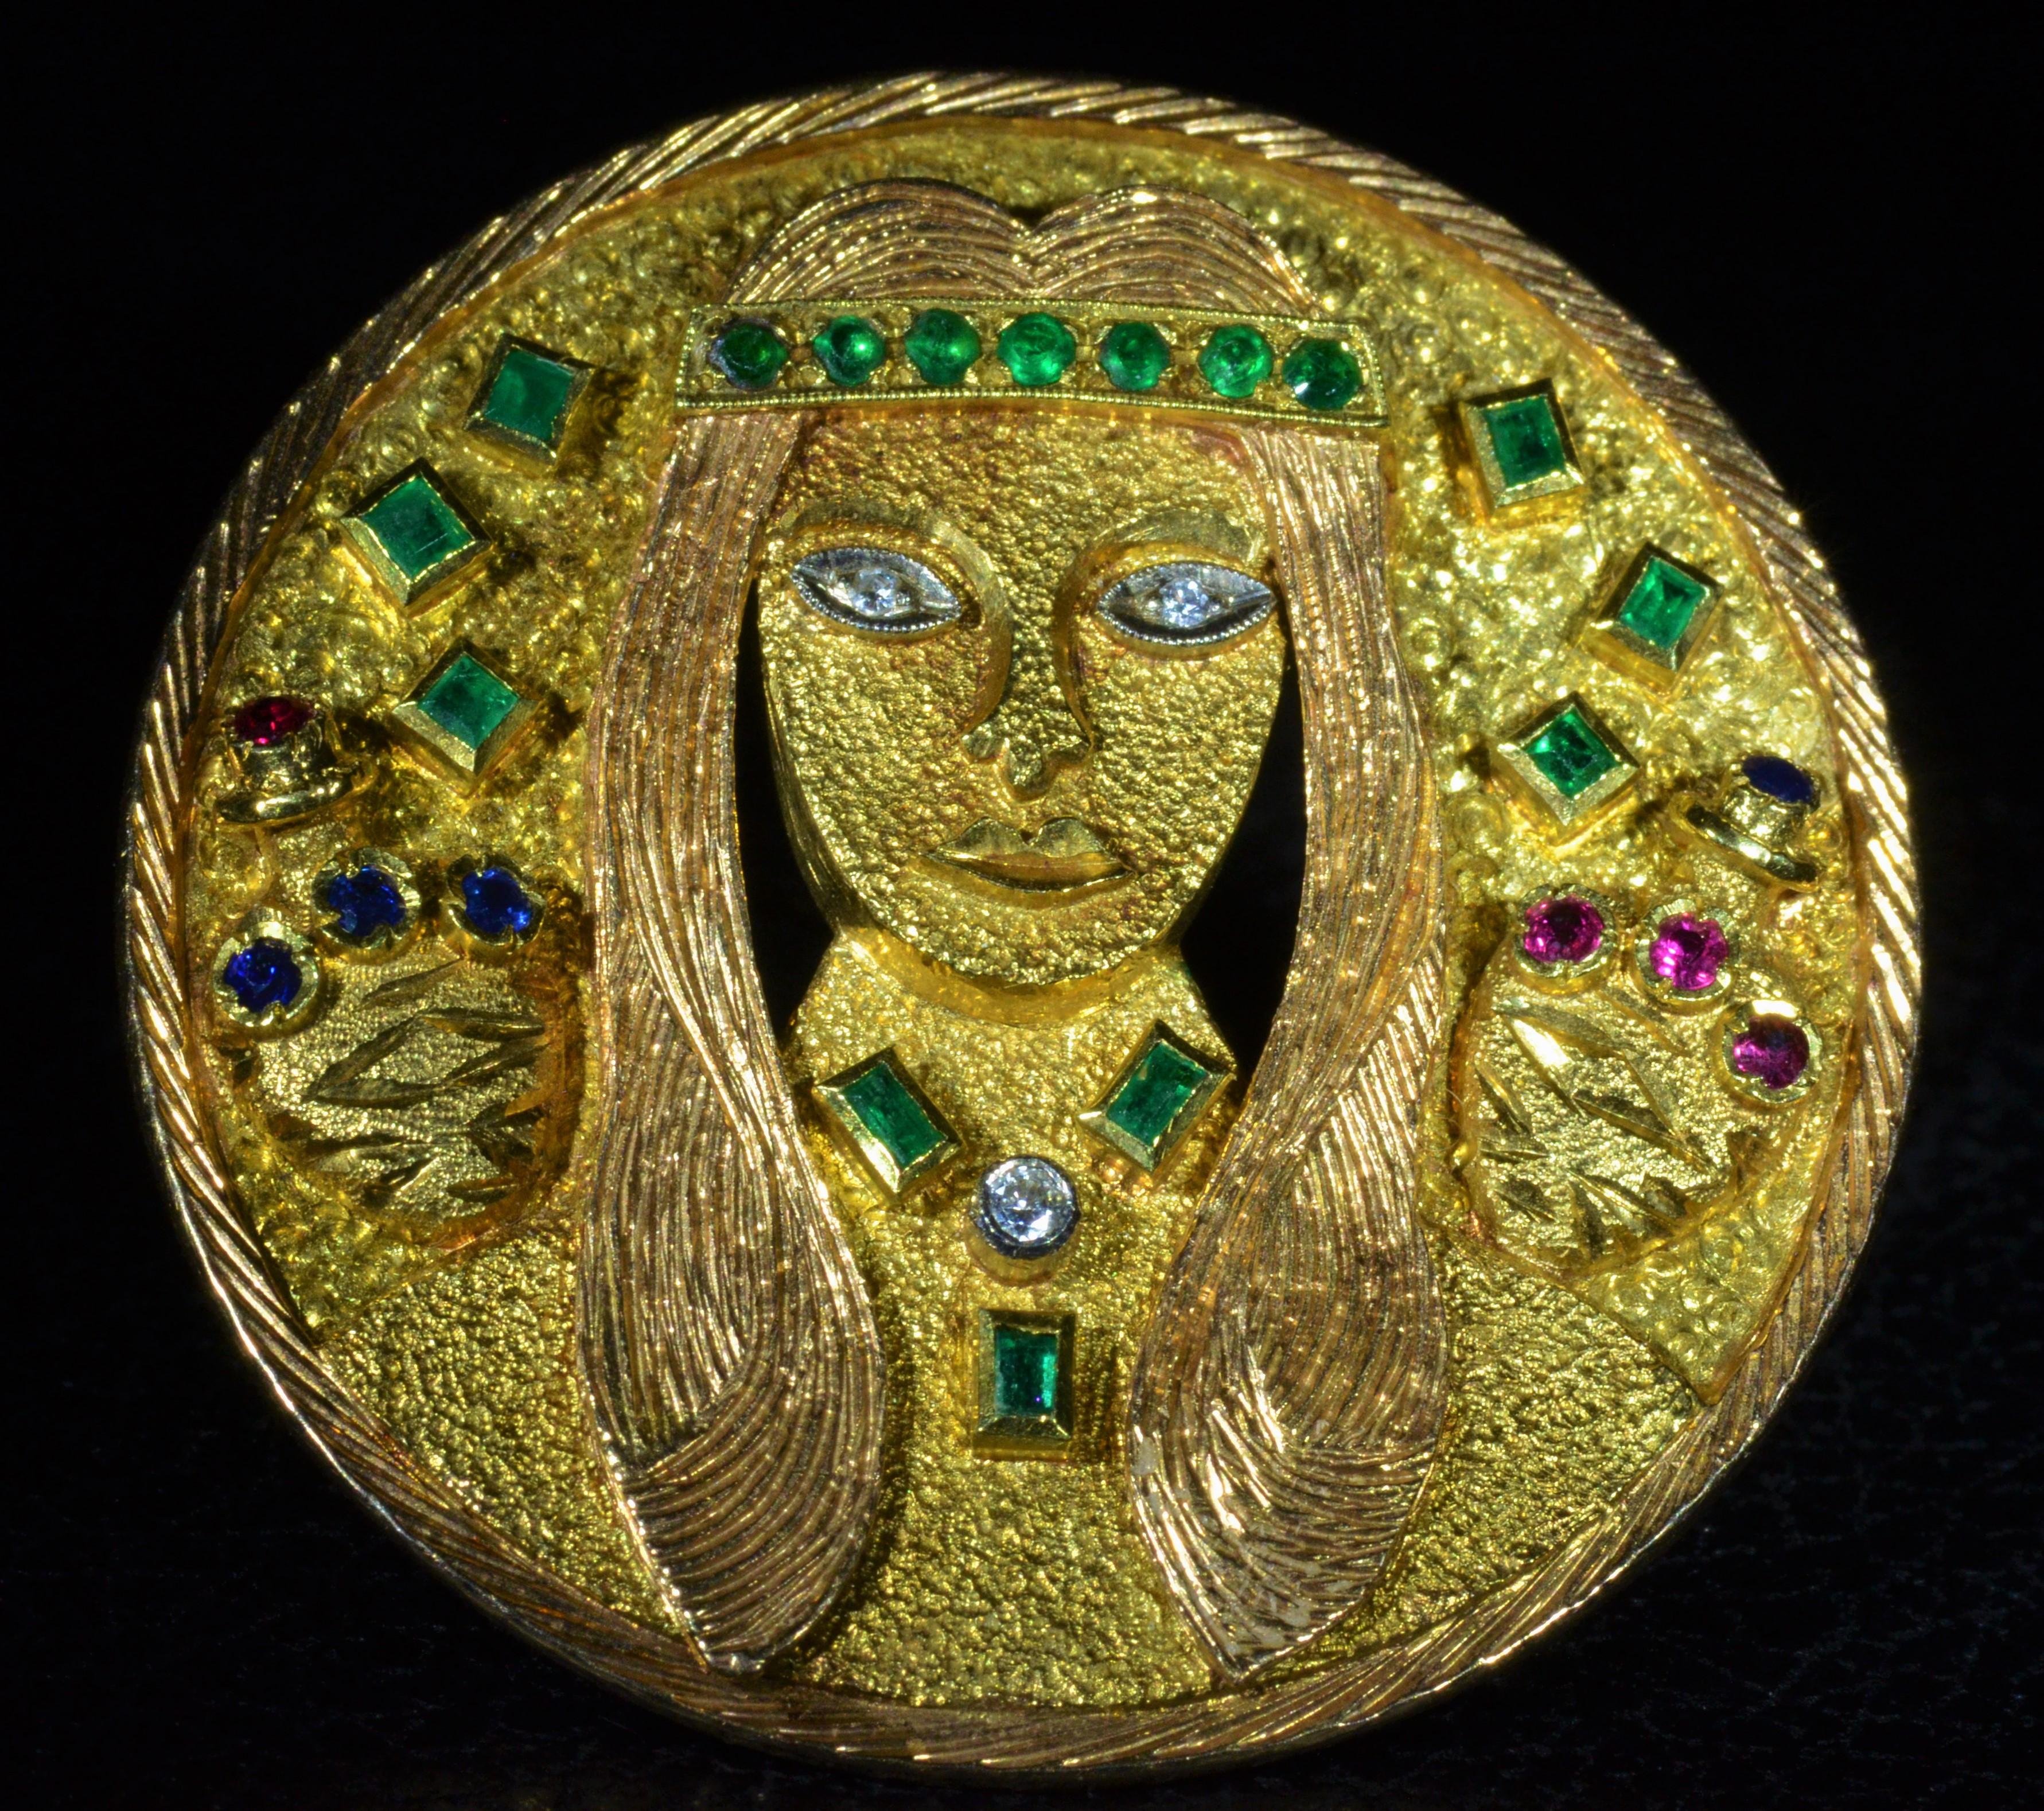 Vintage Signed Goldman Kolber Custom Inca or Mayan lady Pendant Brooch Combination.  The pendant is set with Colombian emeralds, vivid rubies, and sapphires.  The pendant depicts a woman with diamond eyes wearing Colombian emerald headband with